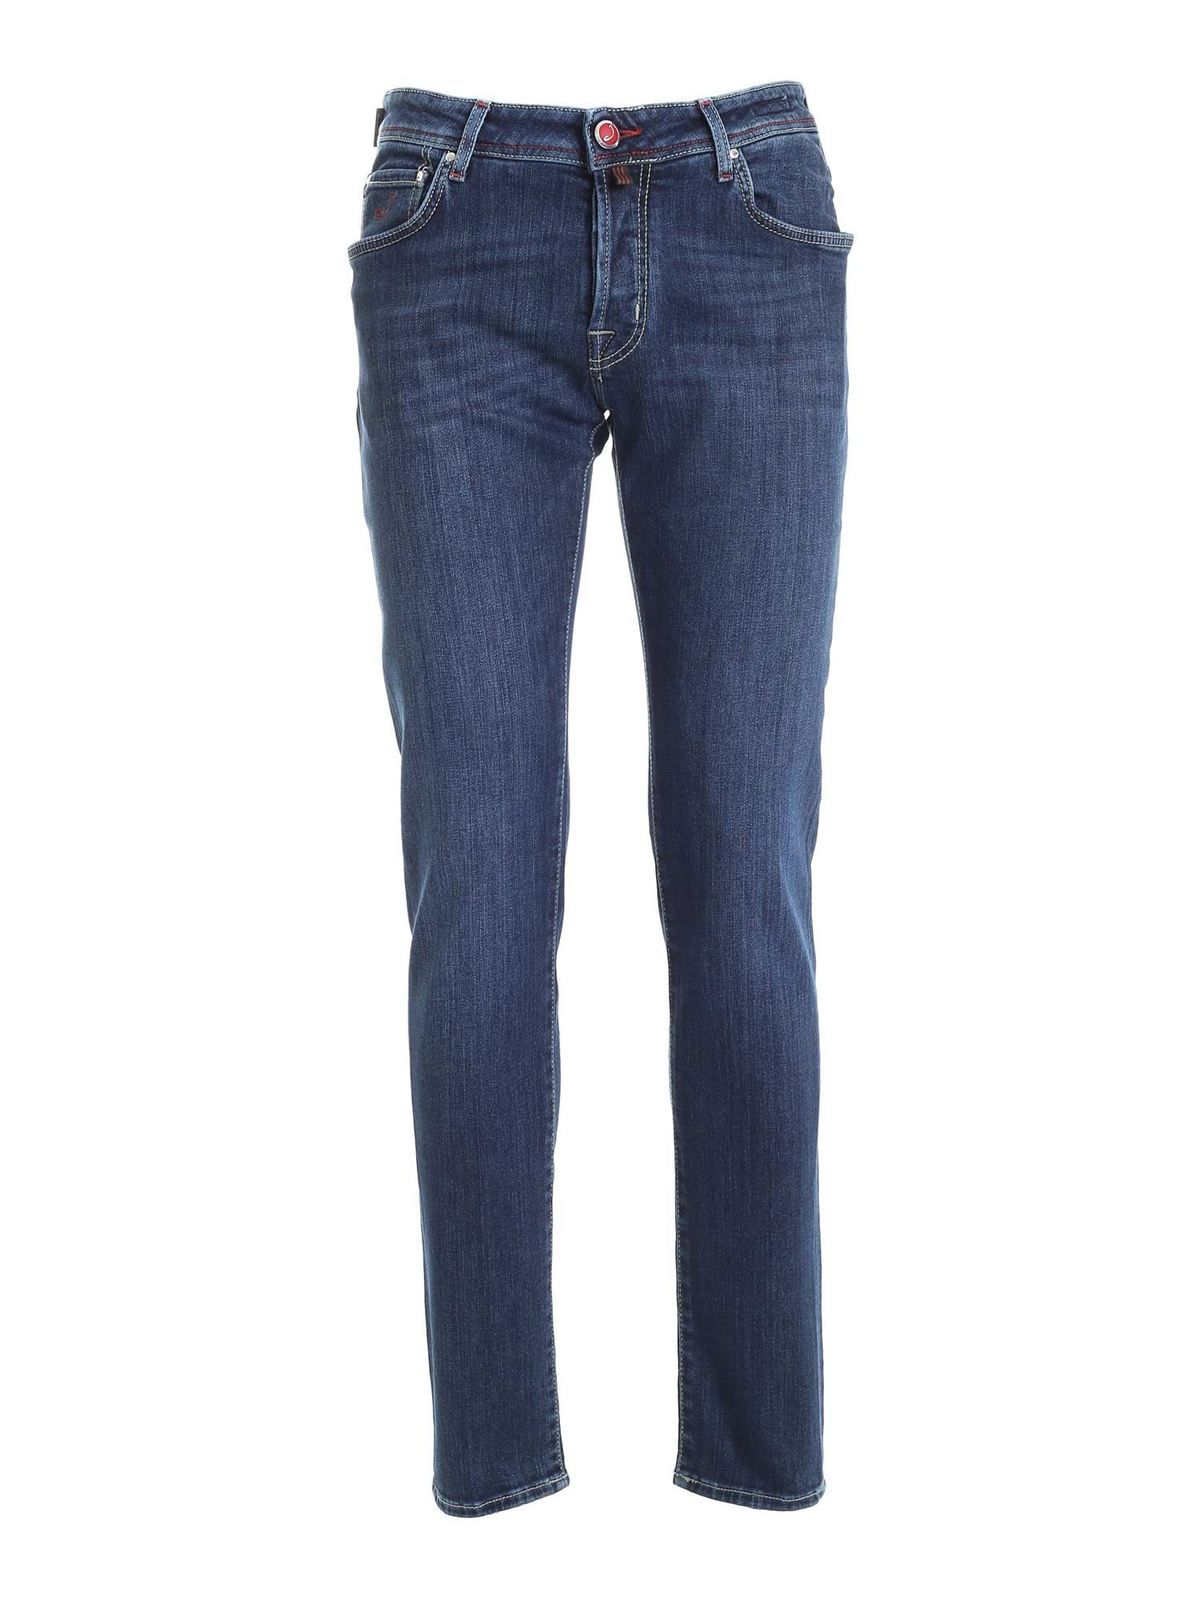 JACOB COHEN JEANS IN BLUE WITH LOGO LABEL